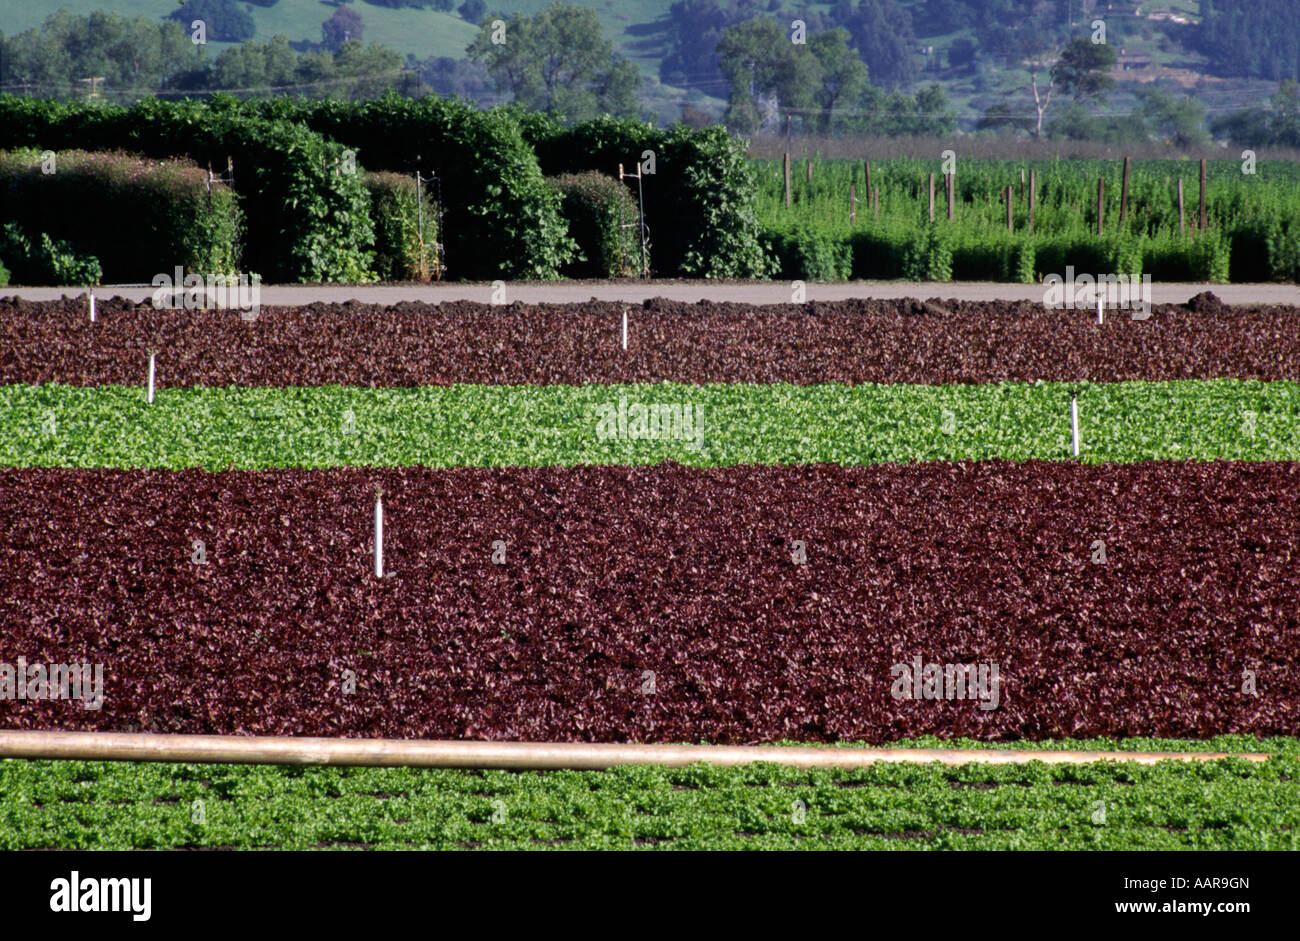 Baby red green curly leaf lettuce alternate in rows Watsonville California Stock Photo